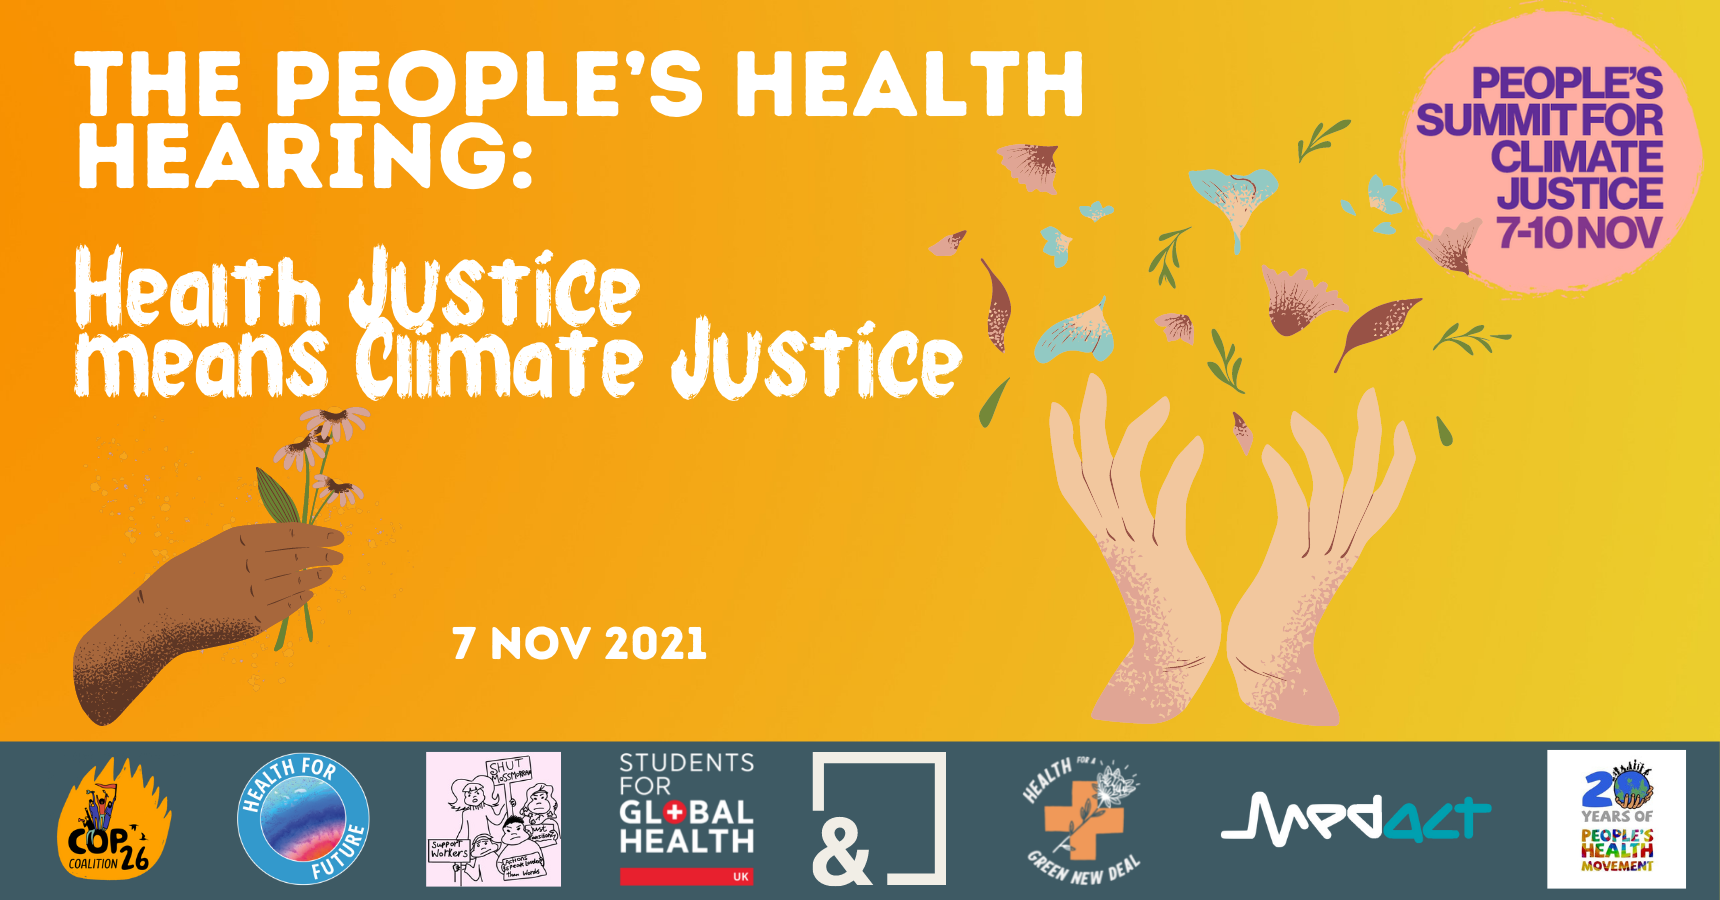 The People's Health Hearing: Health Justice Means Climate Justice. White text on a yellow gradient background. Illustrations show one brown hand holds a flower on the left side, while two white hands throw petals into the air on the right side.